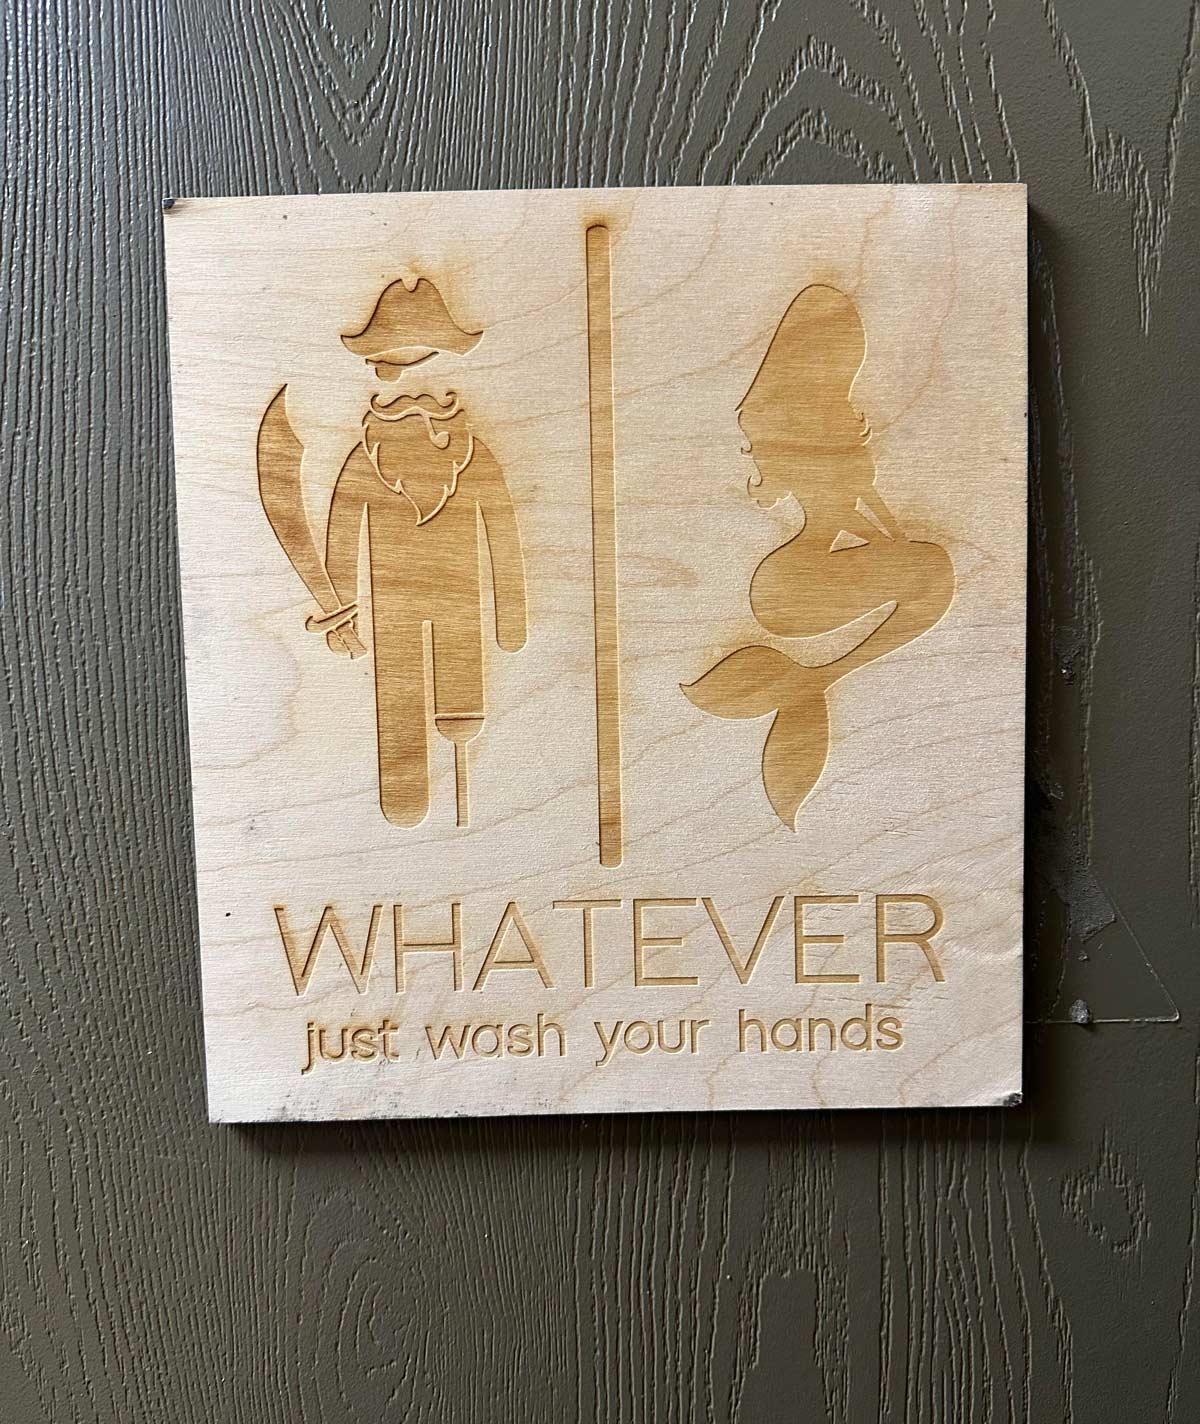 This sign on the bathroom door of a local seafood restaurant